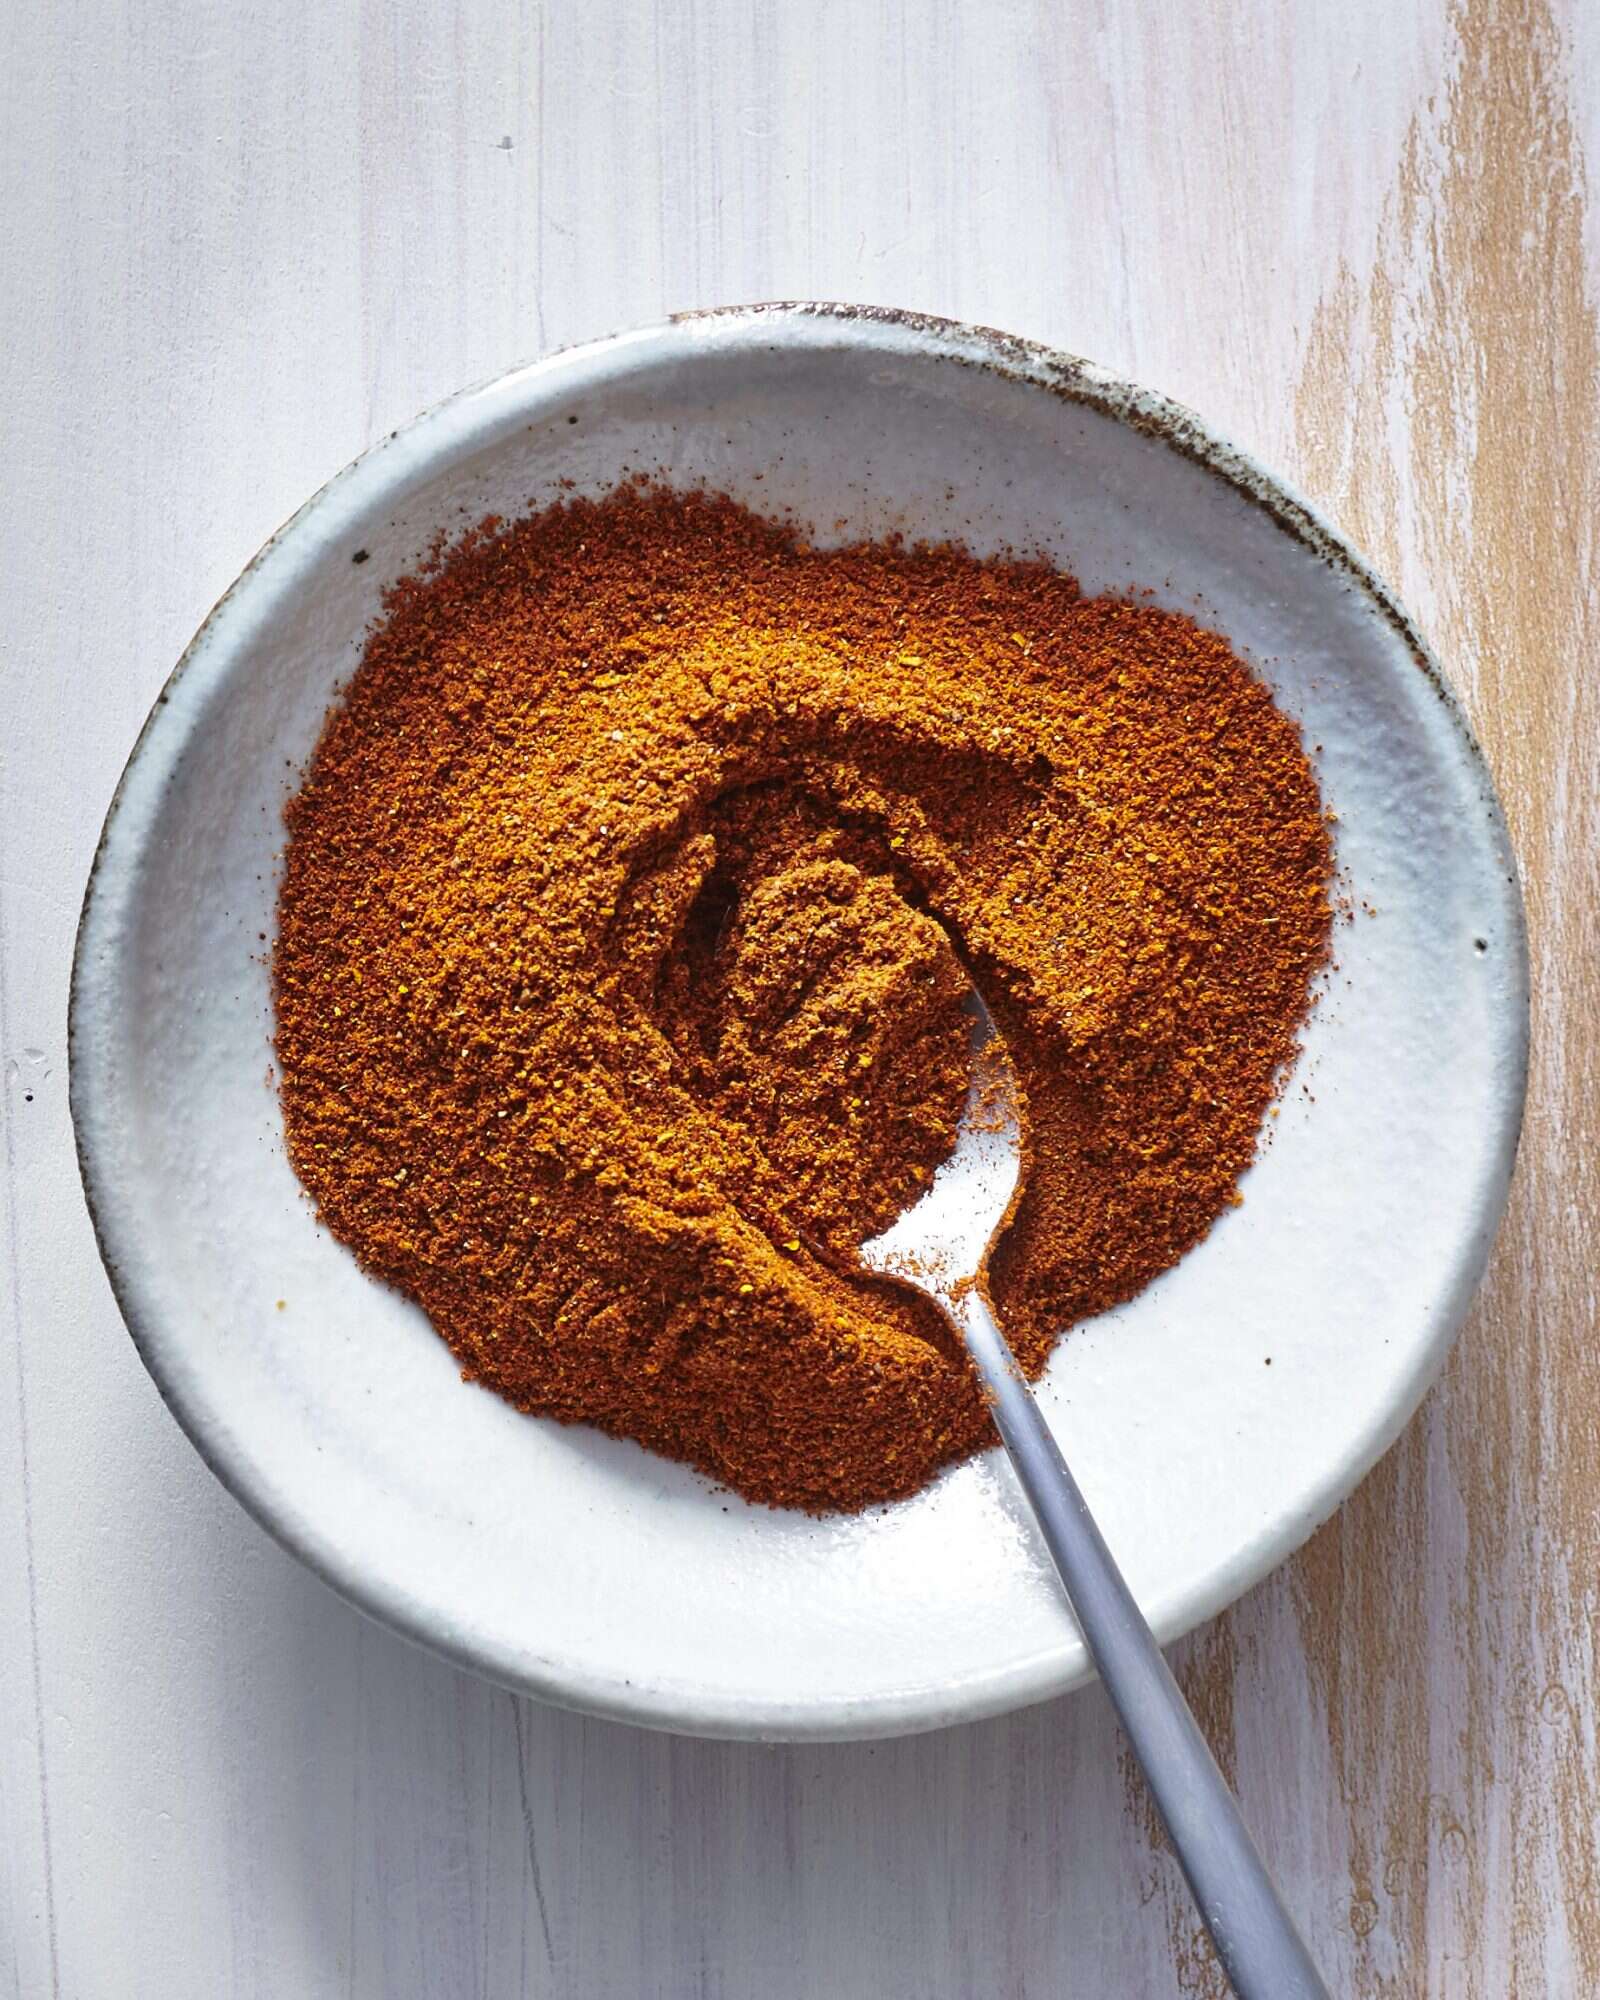 How to Cook With Spices to Add Flavor